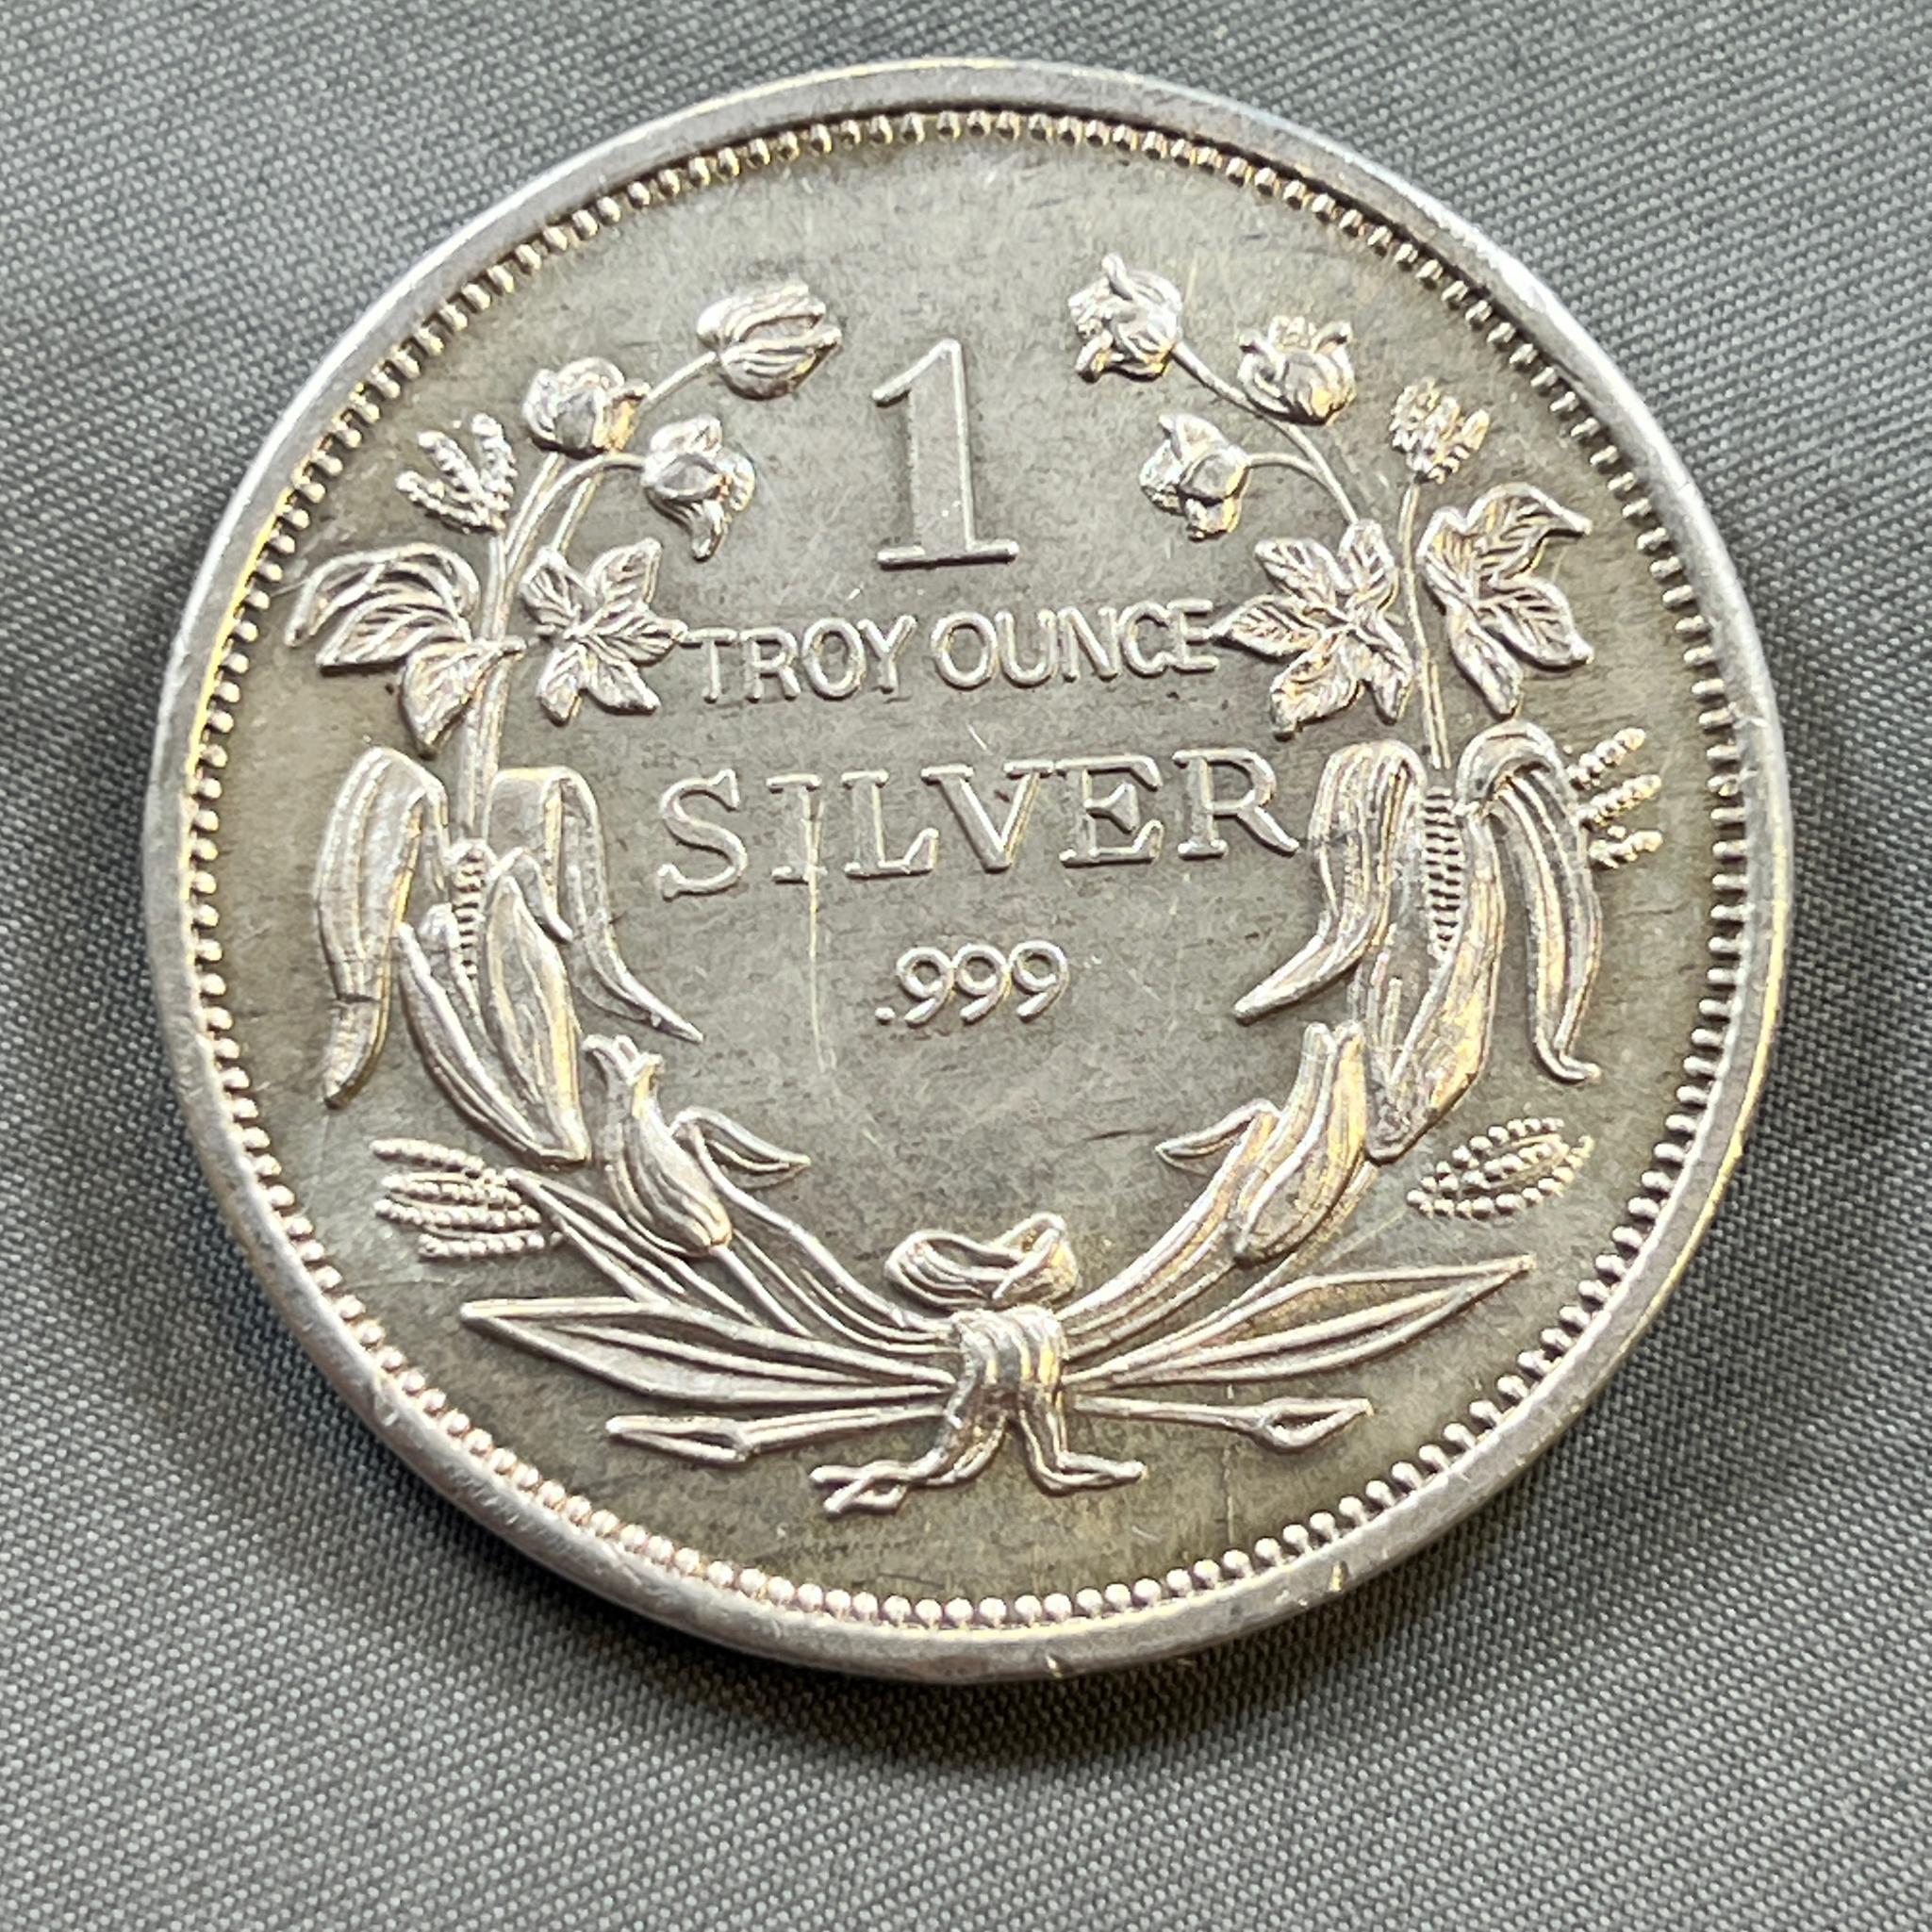 One Troy Ounce .999 Silver Round, SIGMA TESTED